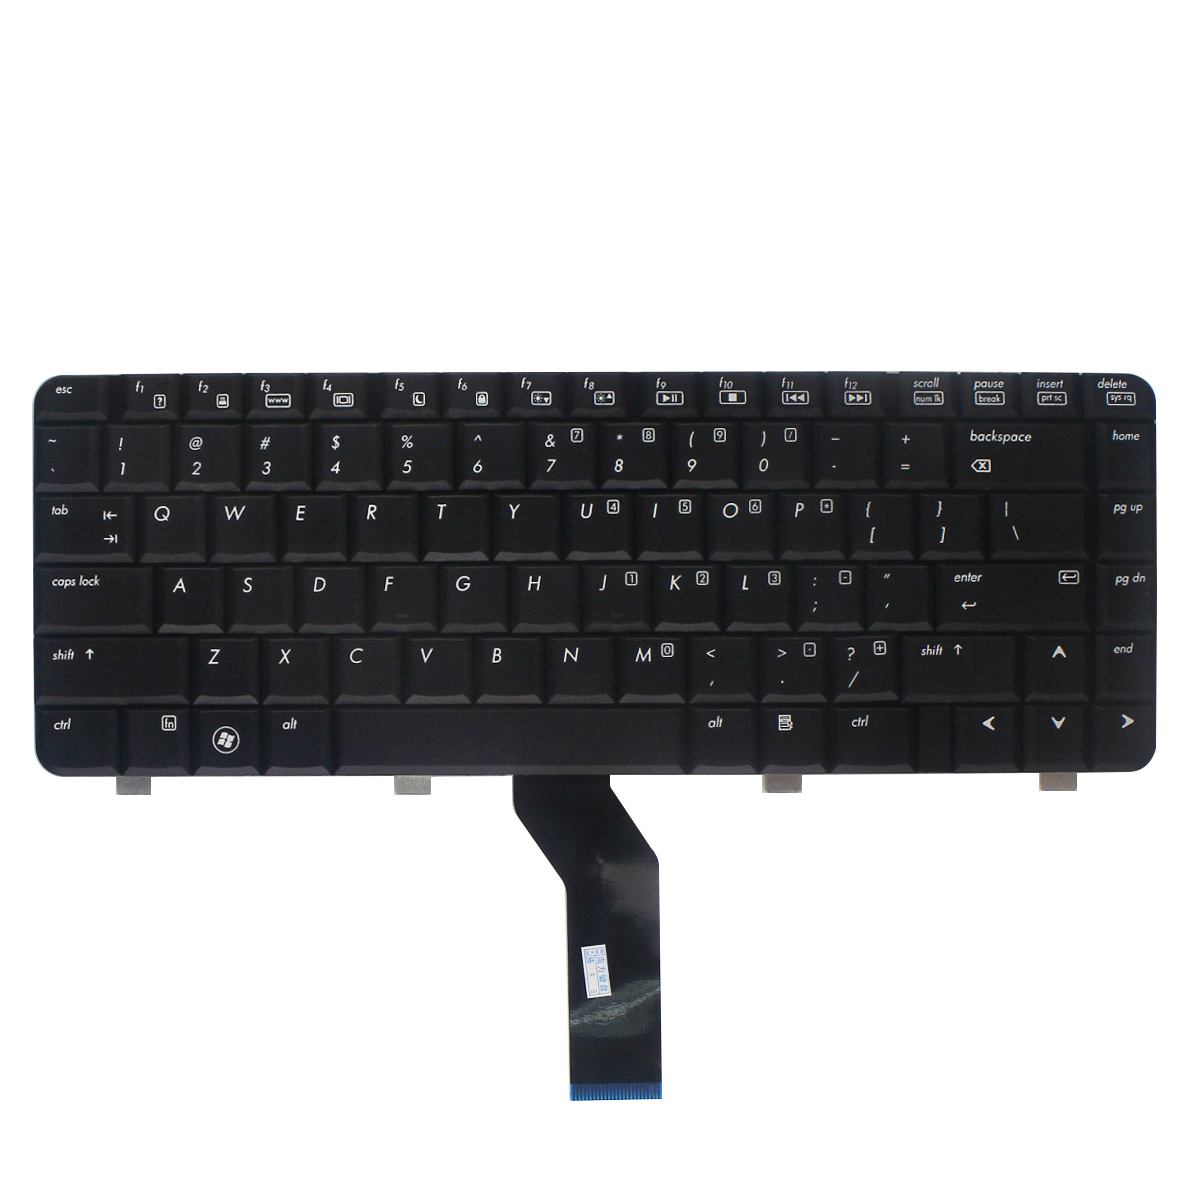 New Keyboard for HP Compaq 6520 6520P 6520S 6720 6720S Laptop 4 - Click Image to Close